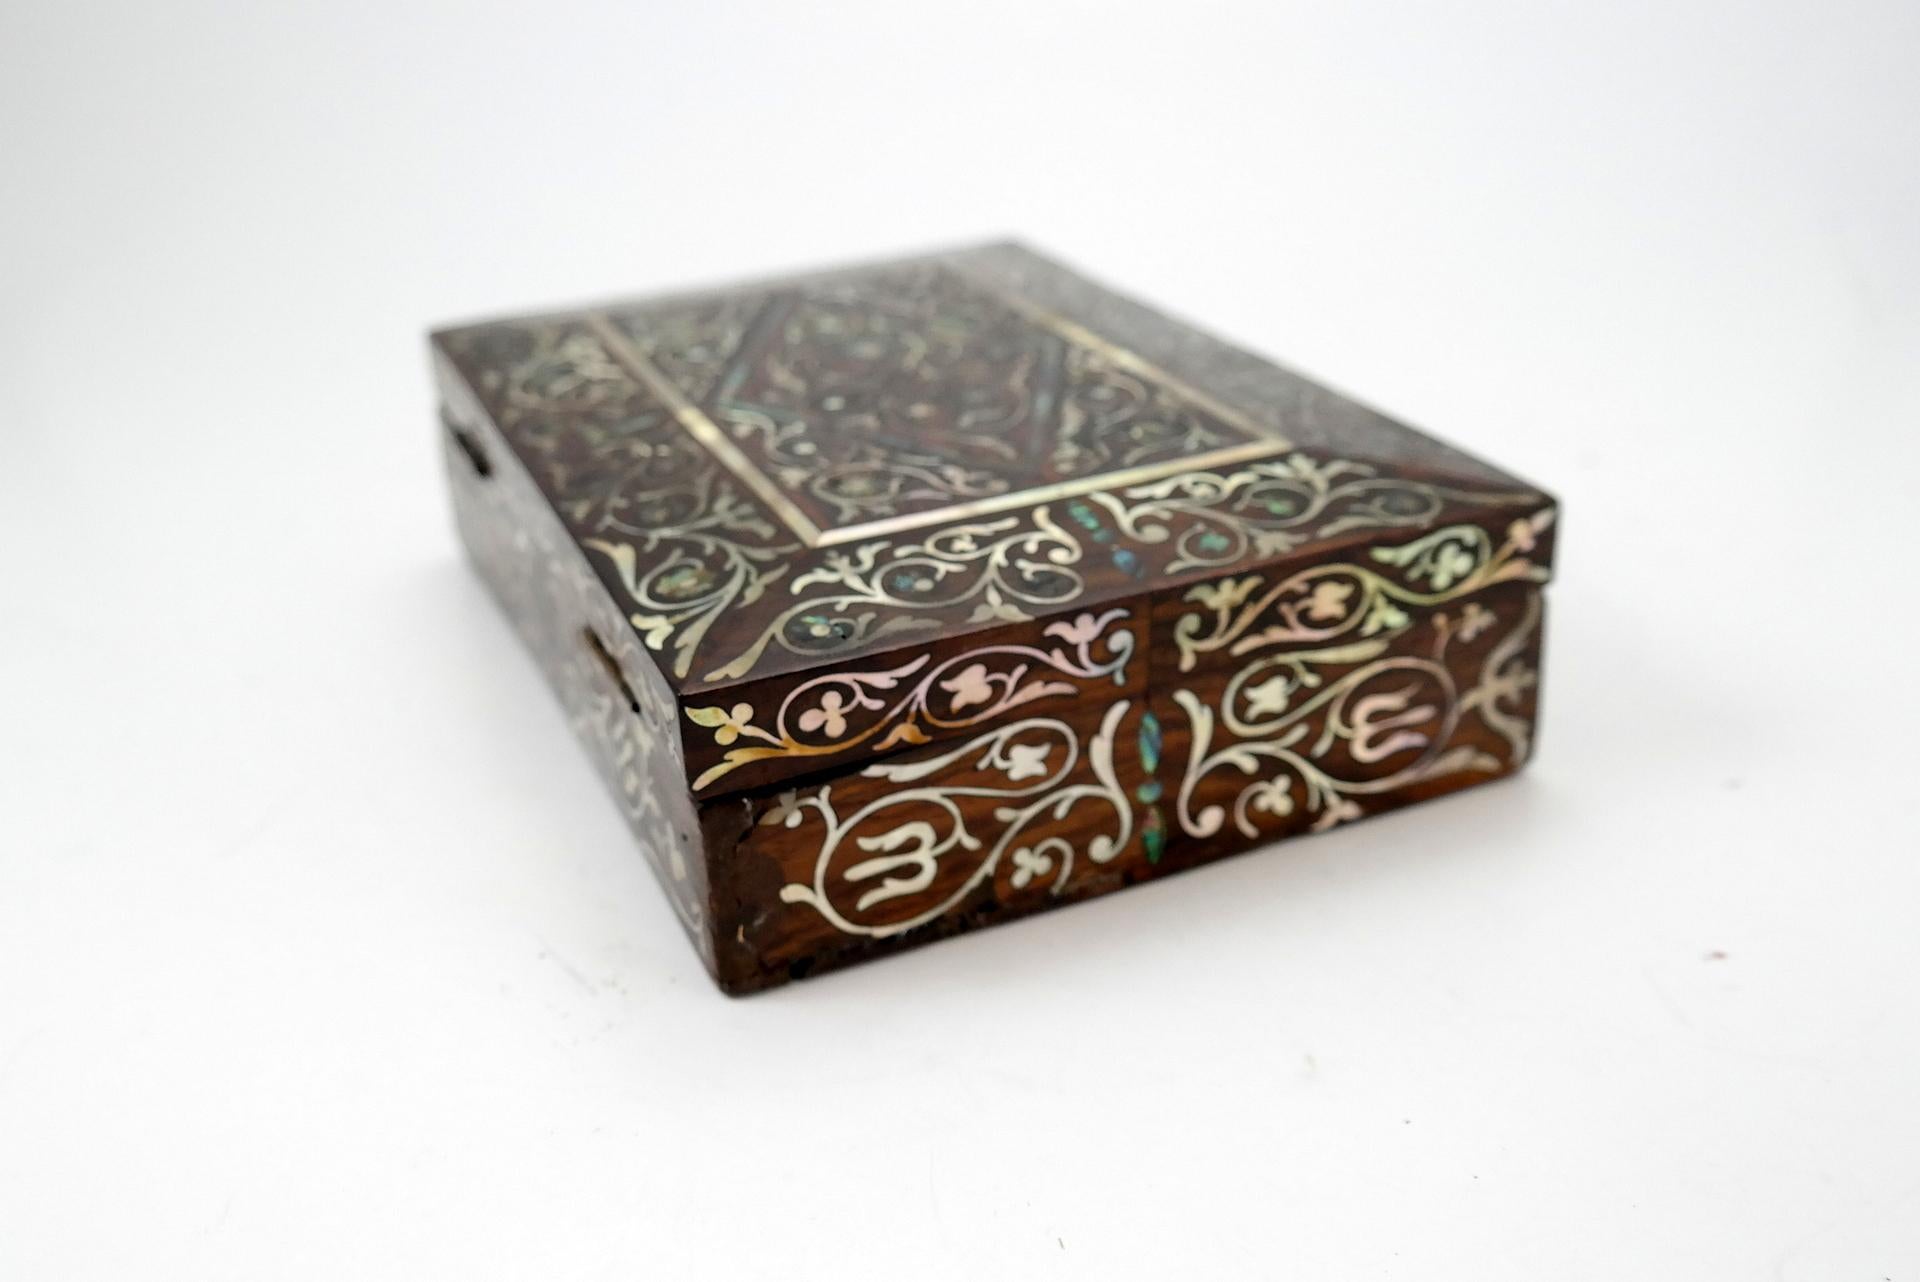 European Wooden Jewelry/Trinket Box with Mother of Pearl Inlay, 19th Century